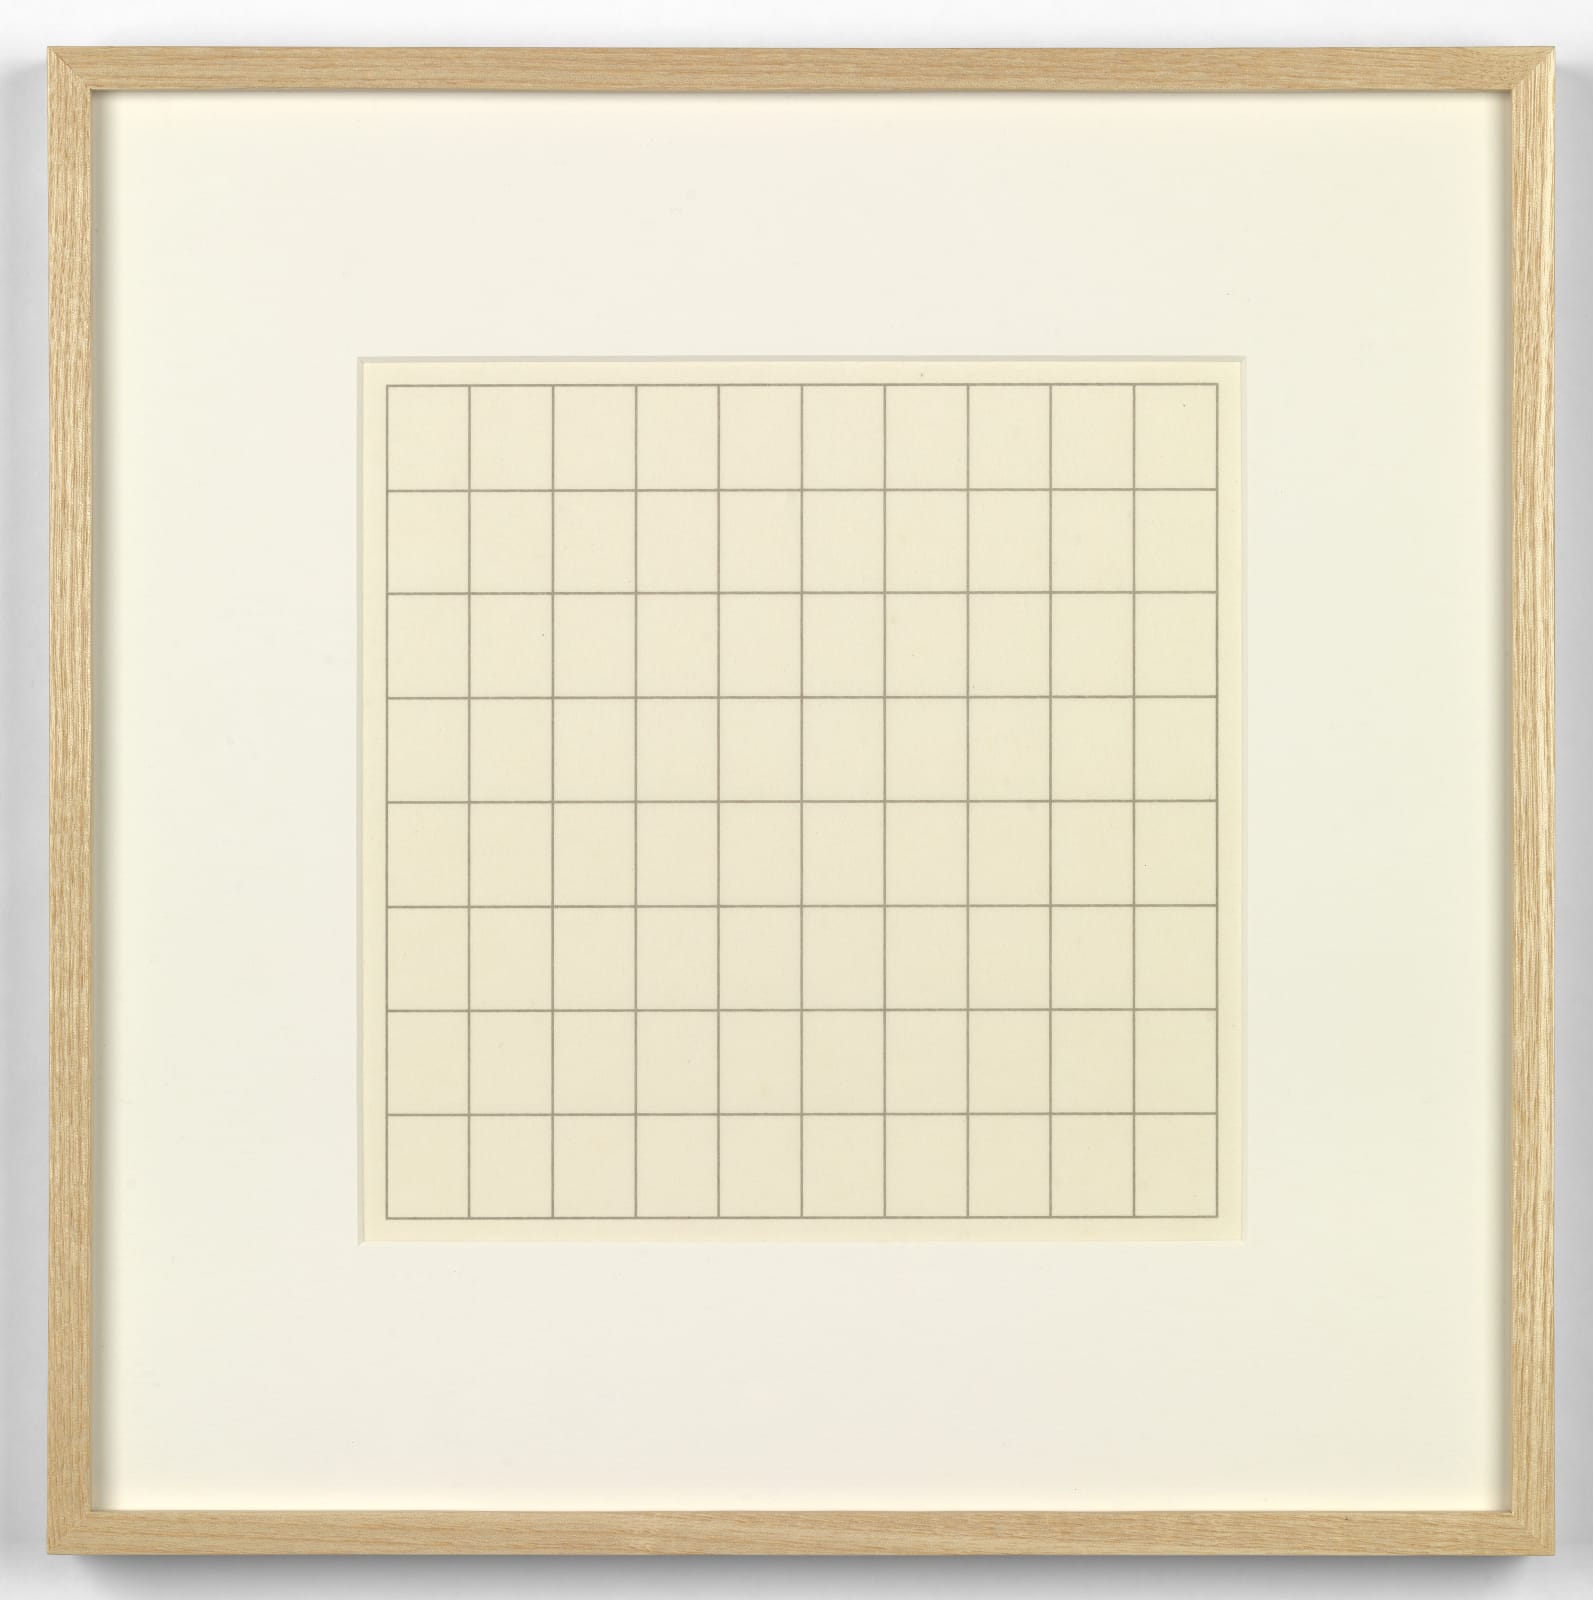 Agnes Martin, Untitled (On a Clear Day) #1, 1973